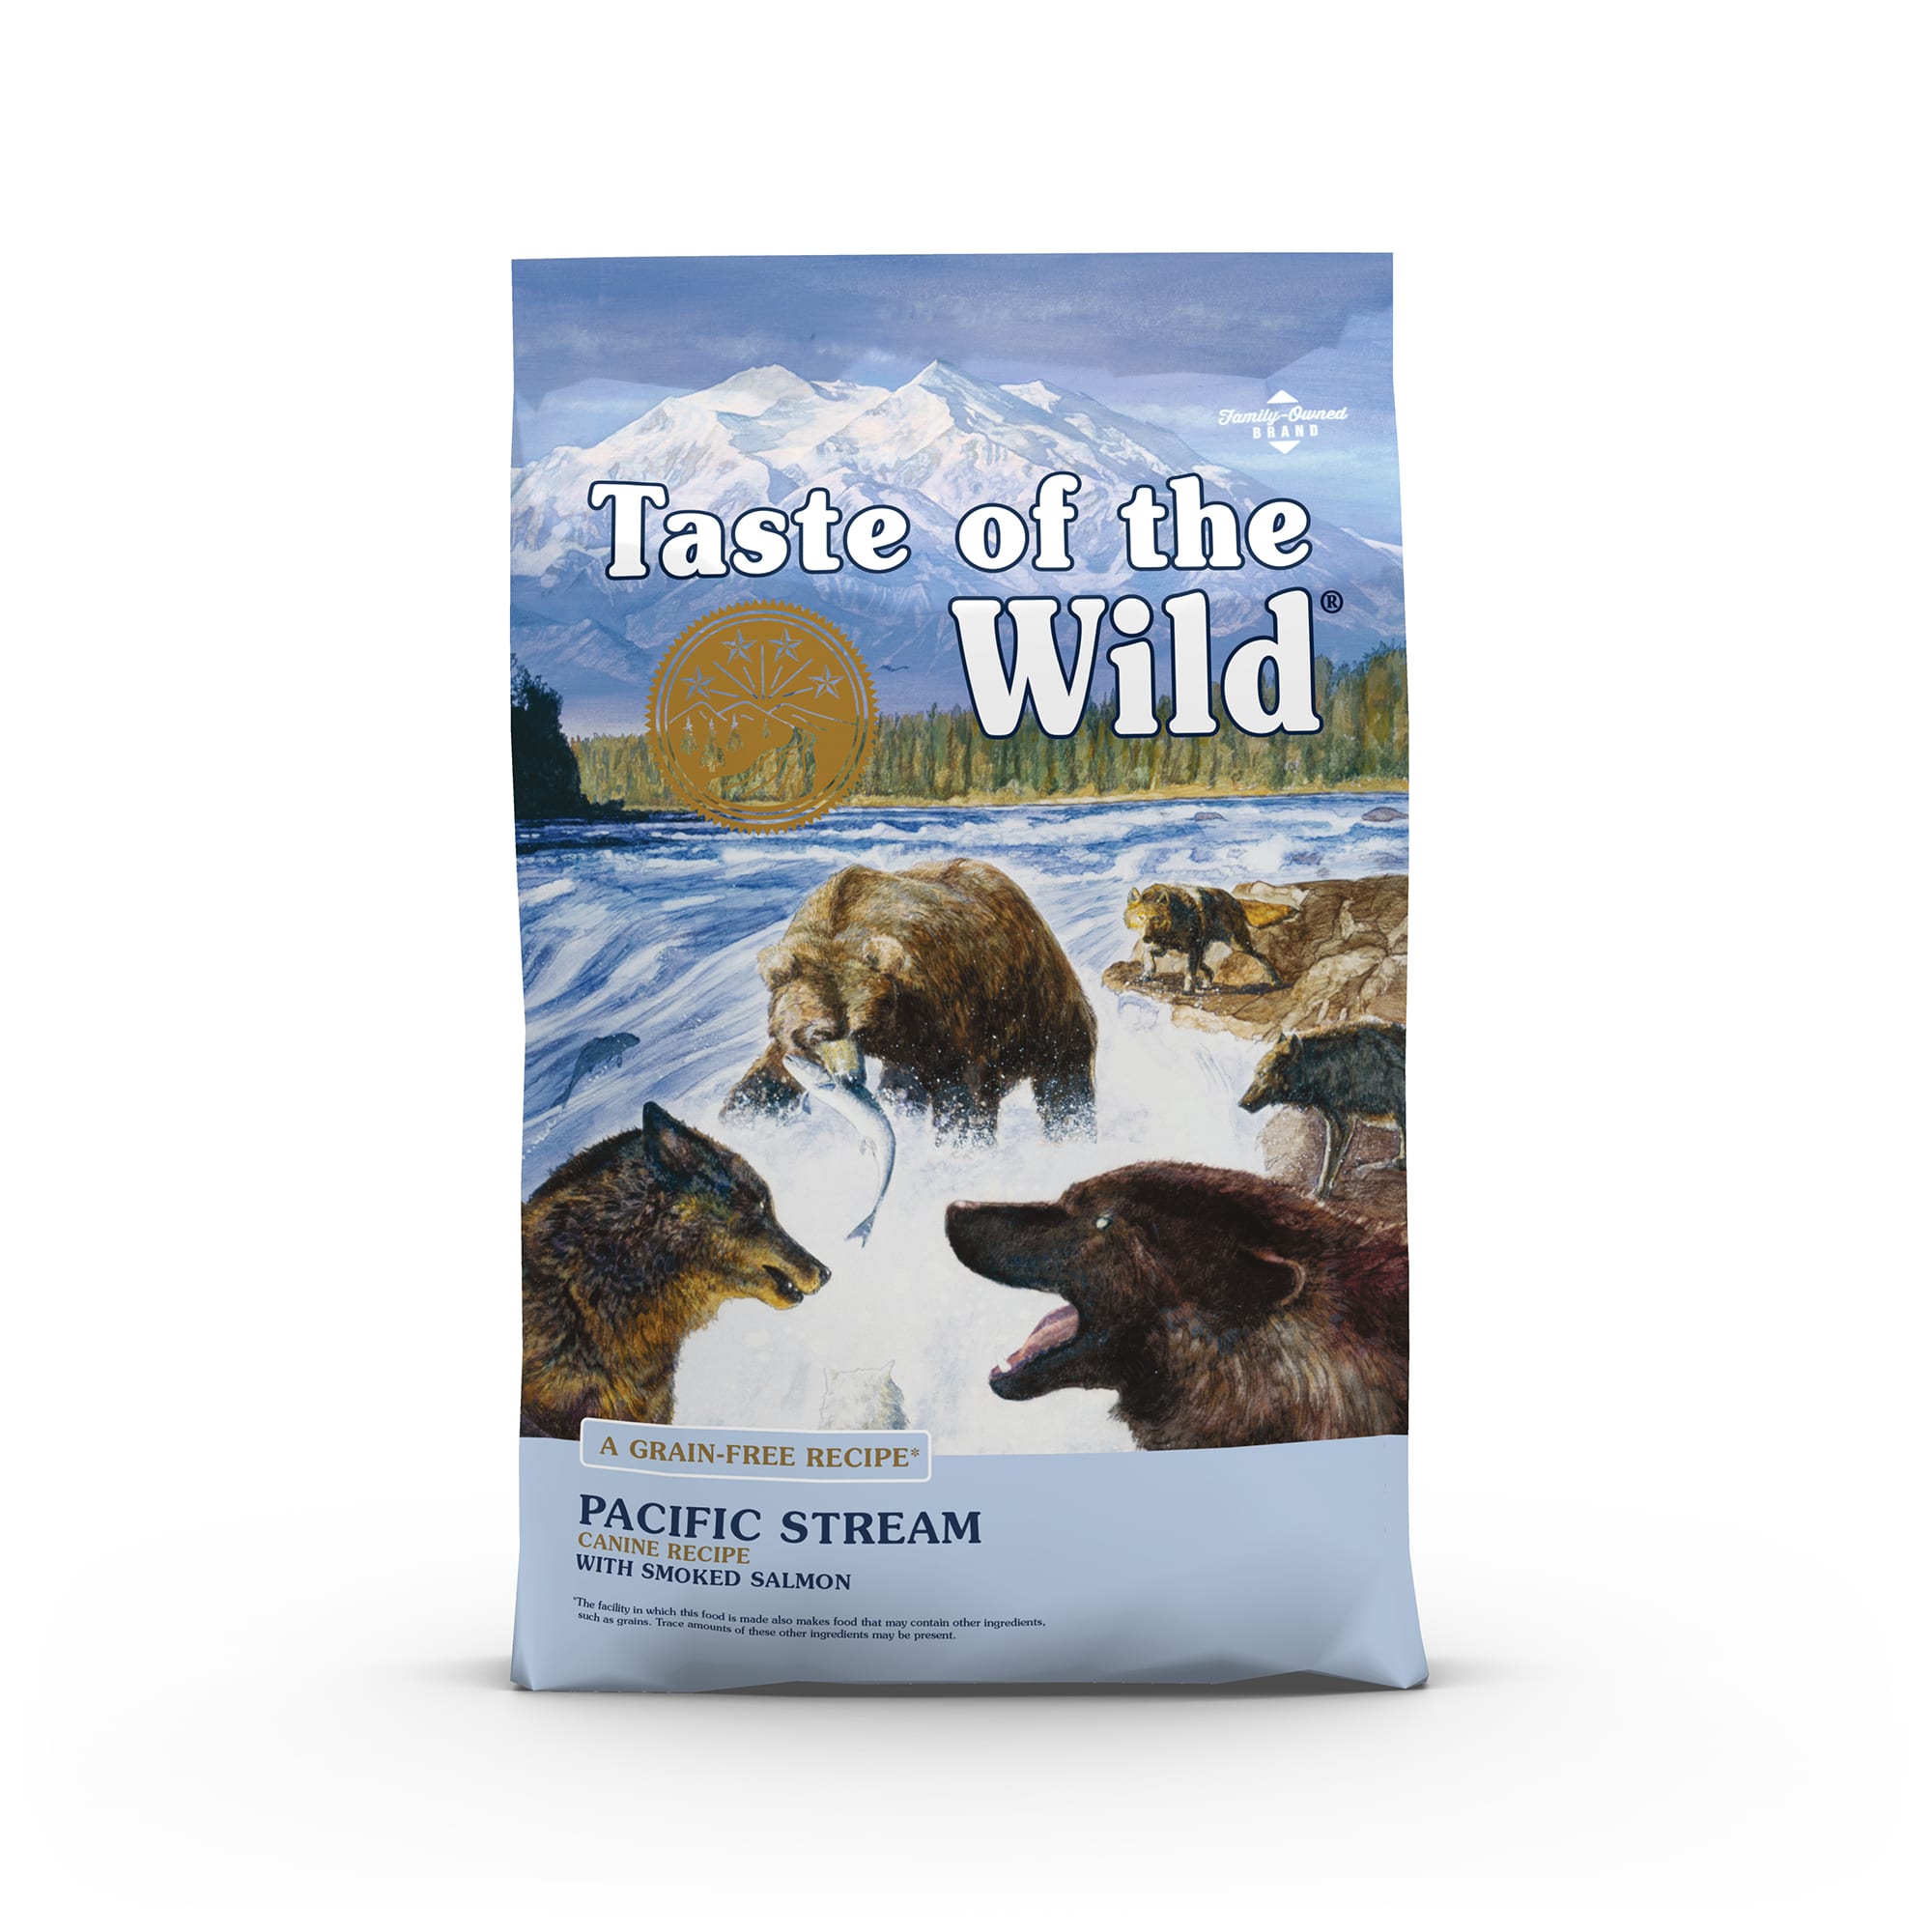 Taste of the Wild Pacific Stream Dry Dog Food